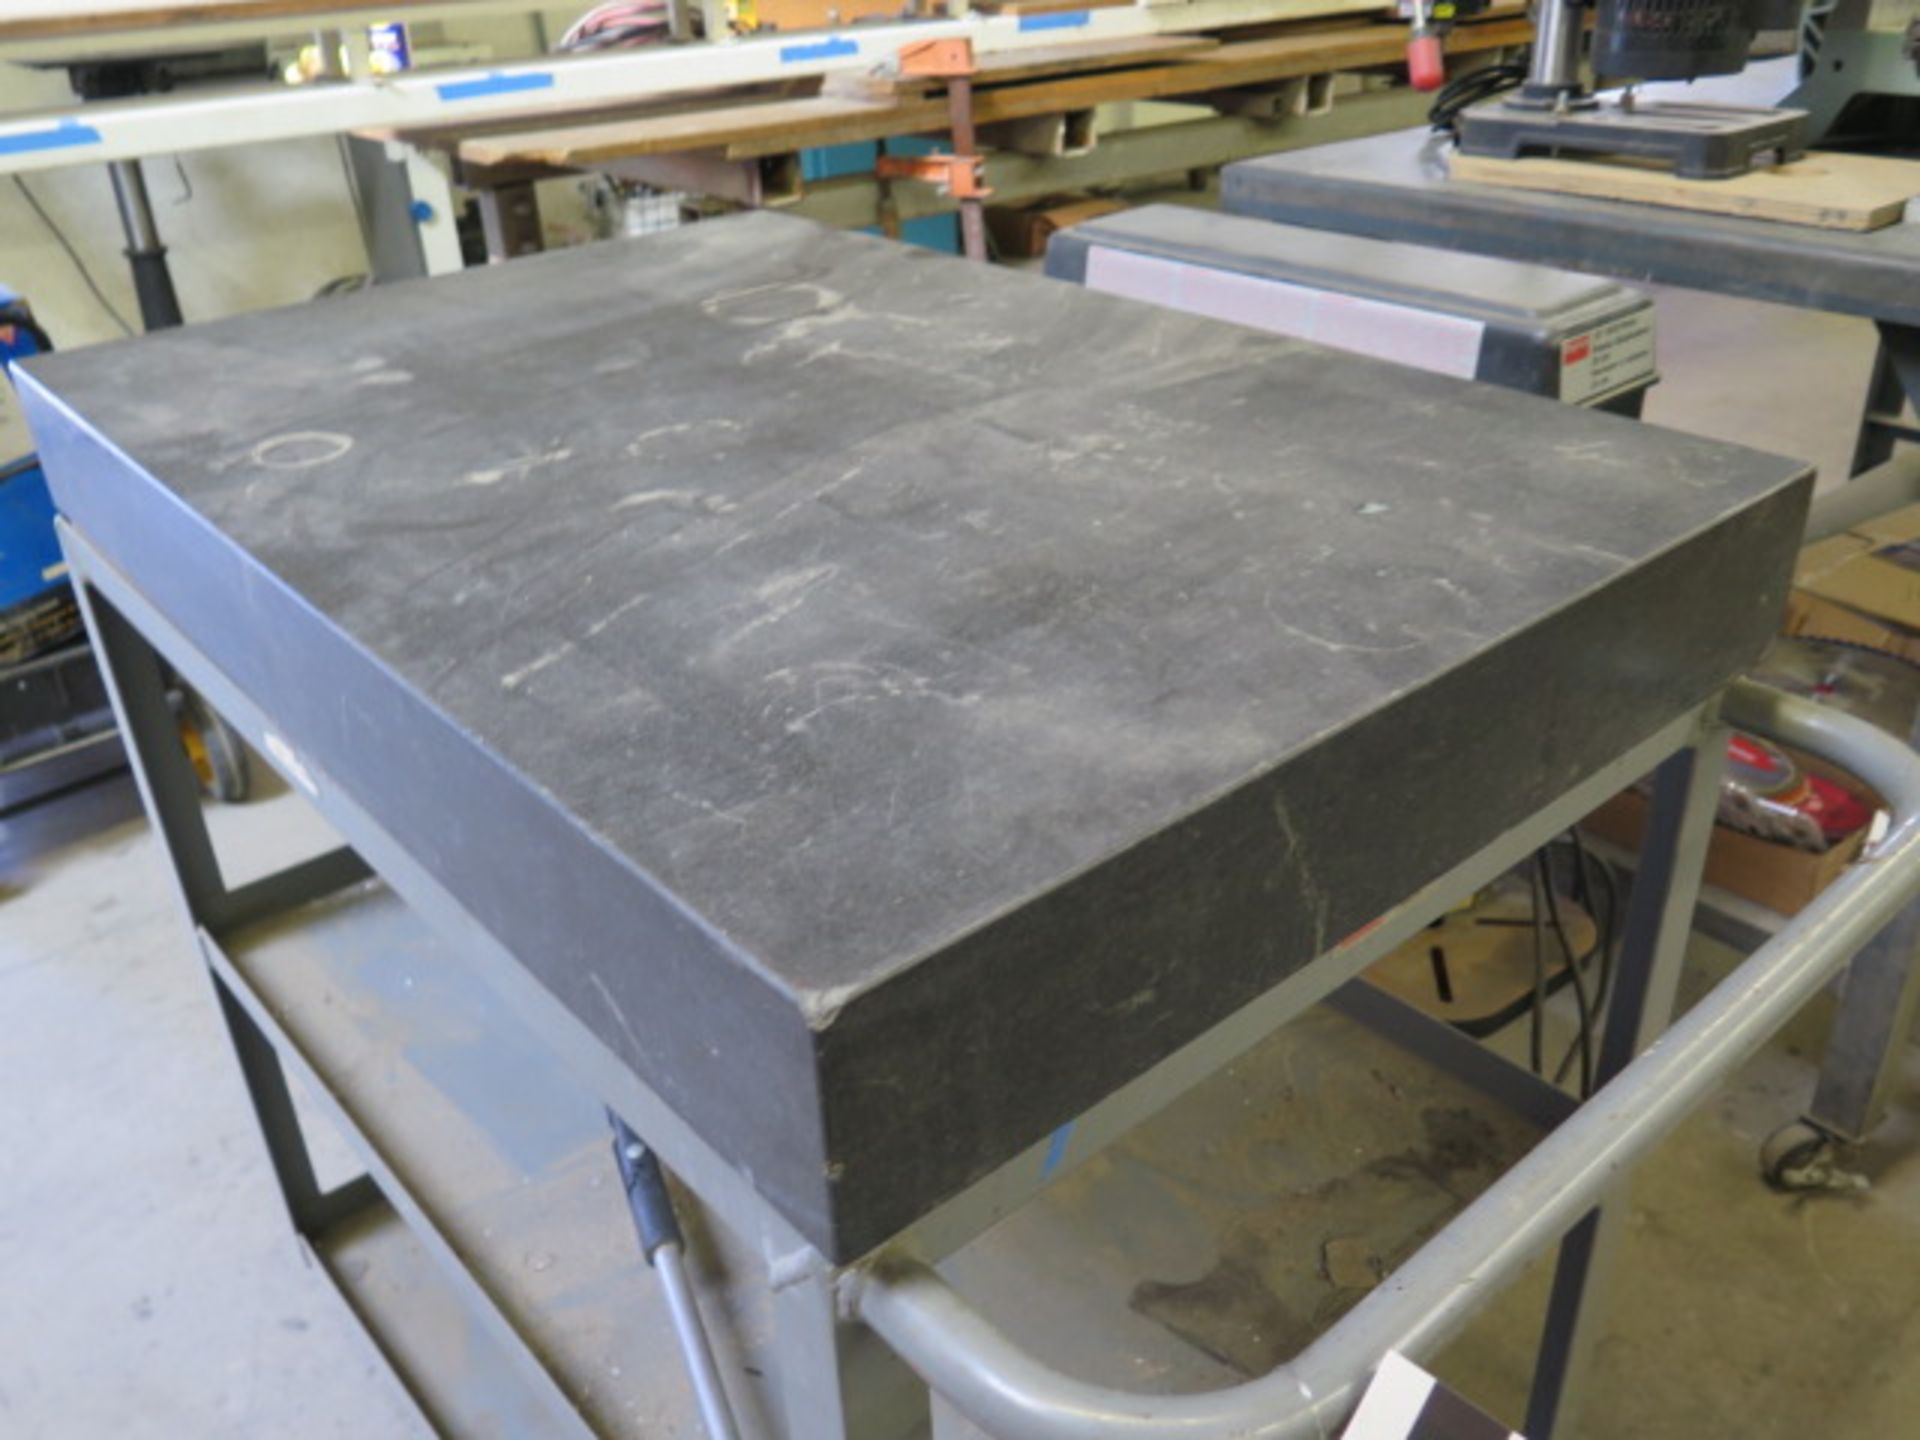 24" x 36" x 4" Granite Surface Plate w/ Cart (SOLD AS-IS - NO WARRANTY) - Image 3 of 5